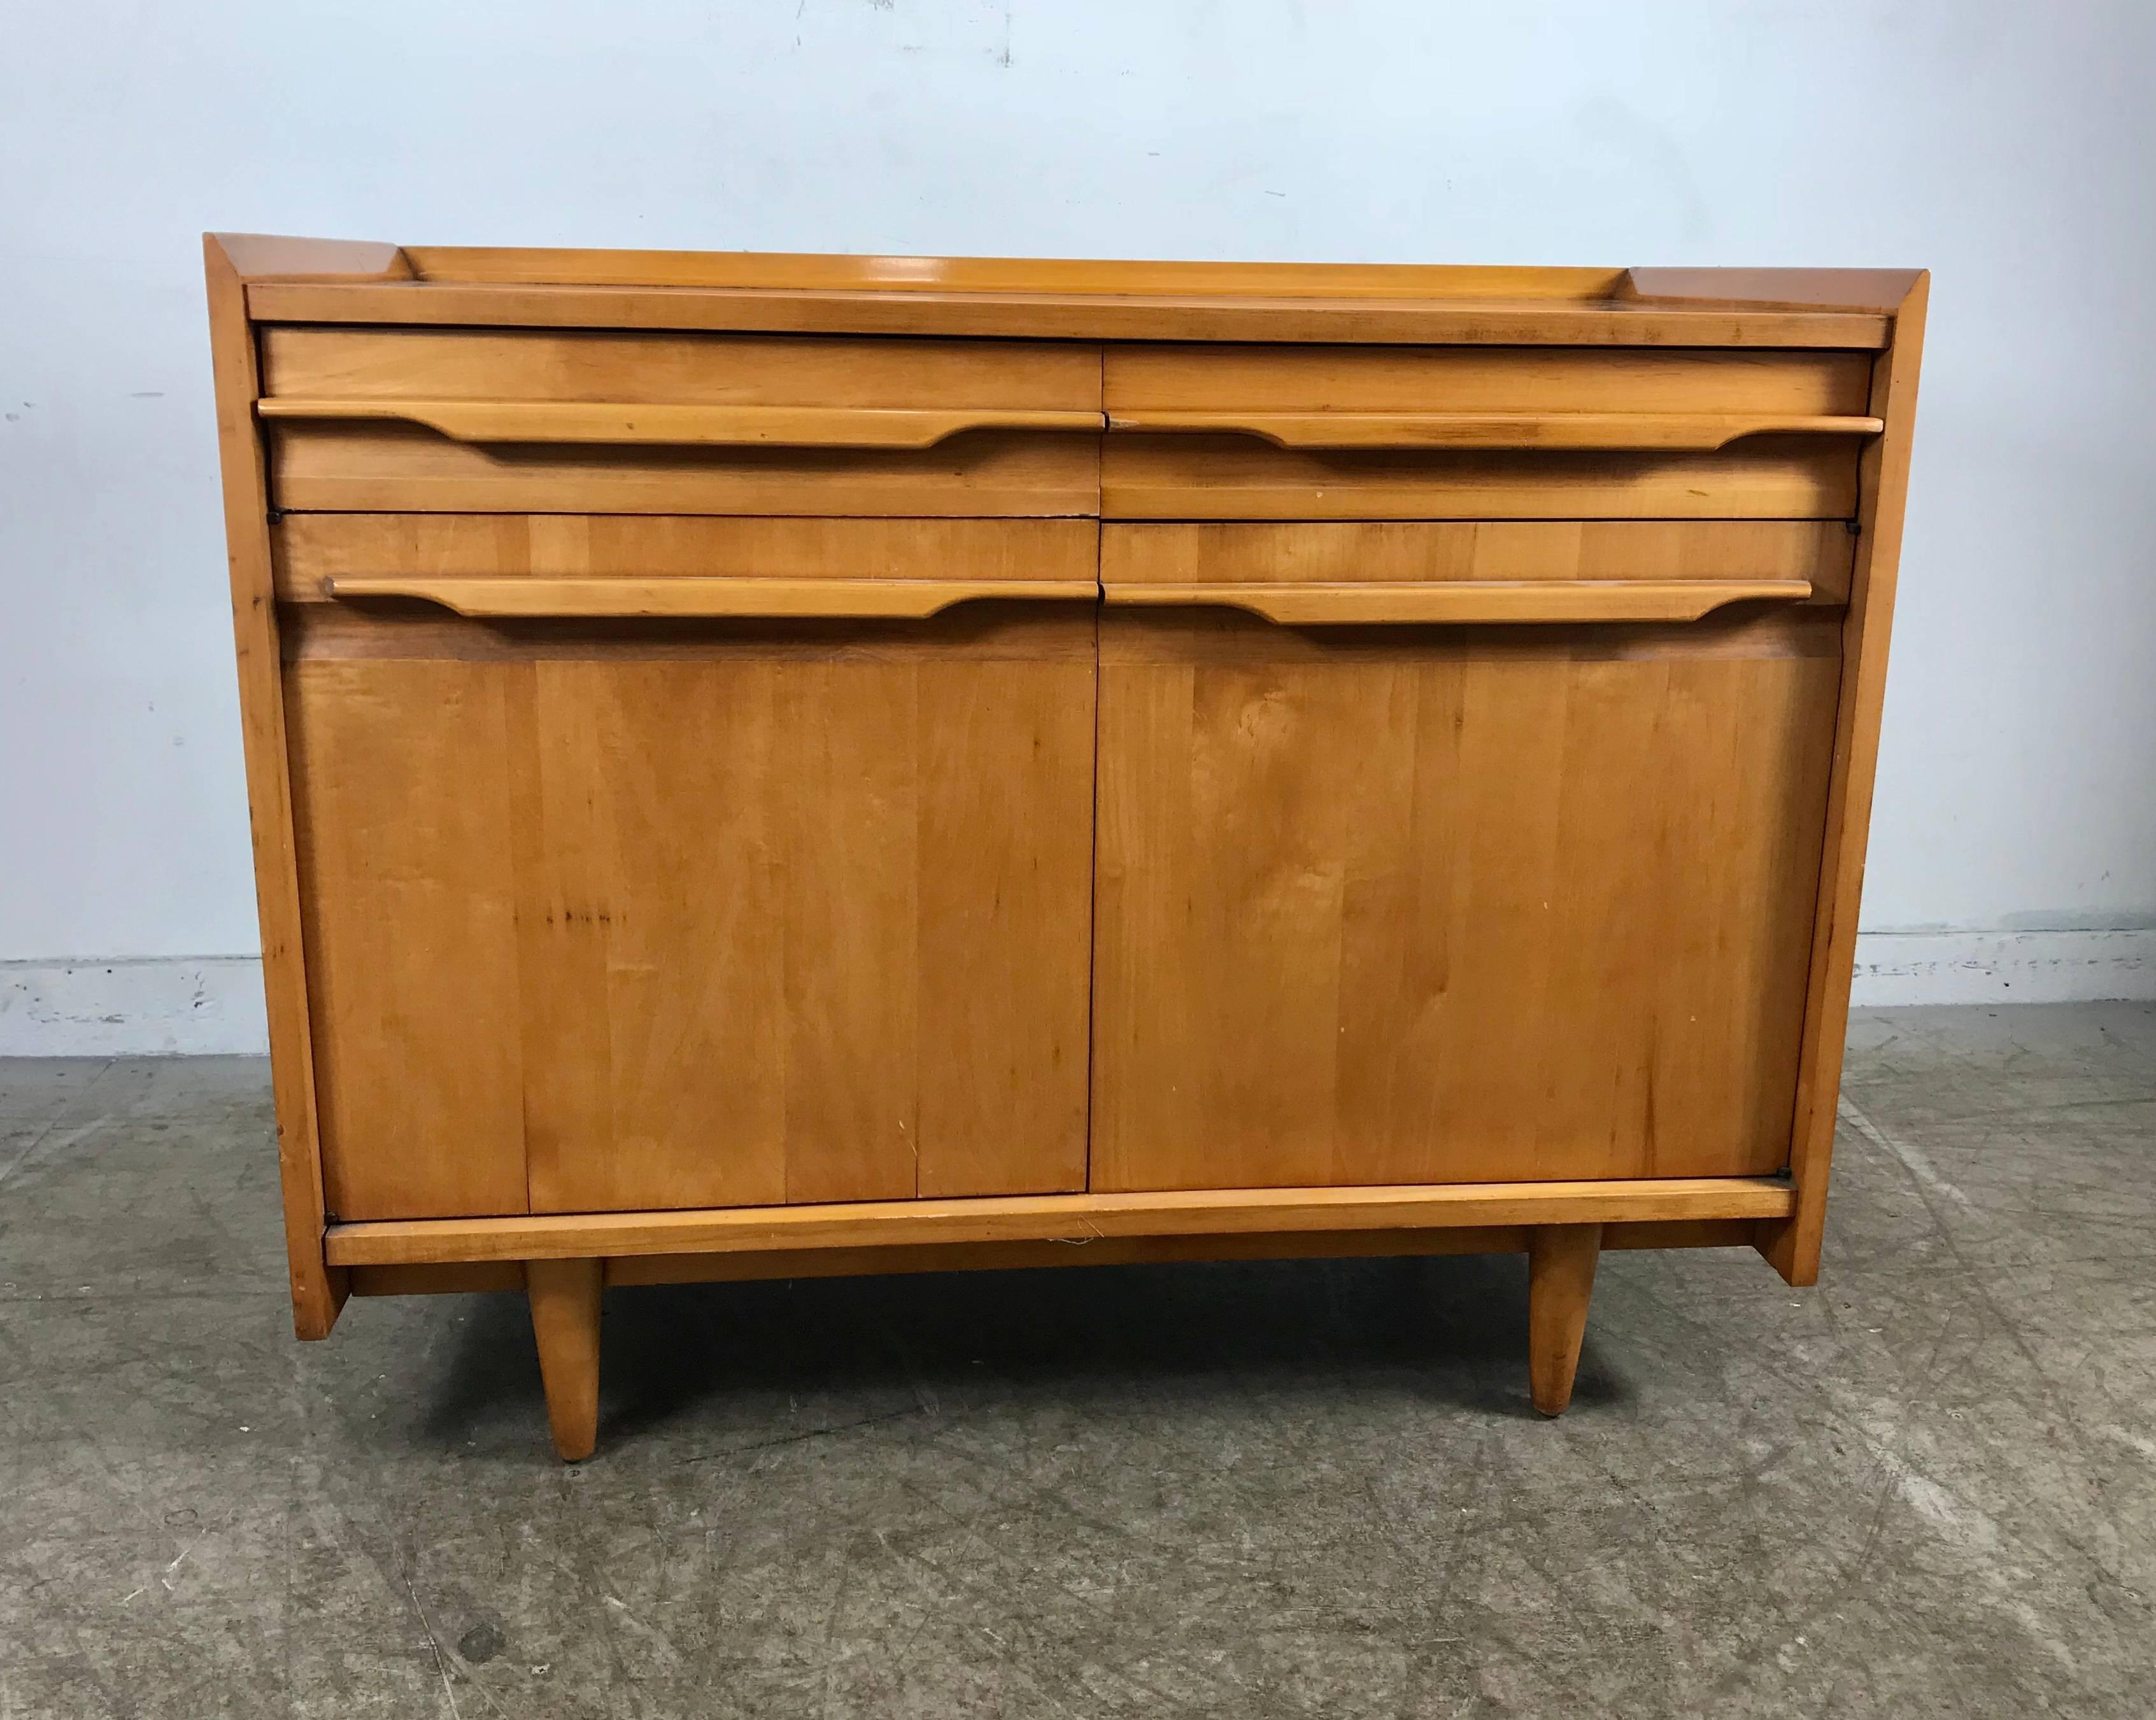 Handsome Modernist Solid Blond Birch Woo.  Two Door,Two Drawer Cabinet by Crawford Furniture ,Jamestown Ny. Classic Style,,wonderful sculpted hand pulls,Great size,scale and proportion. Hand delivery avail to New York City or anywhere en route from